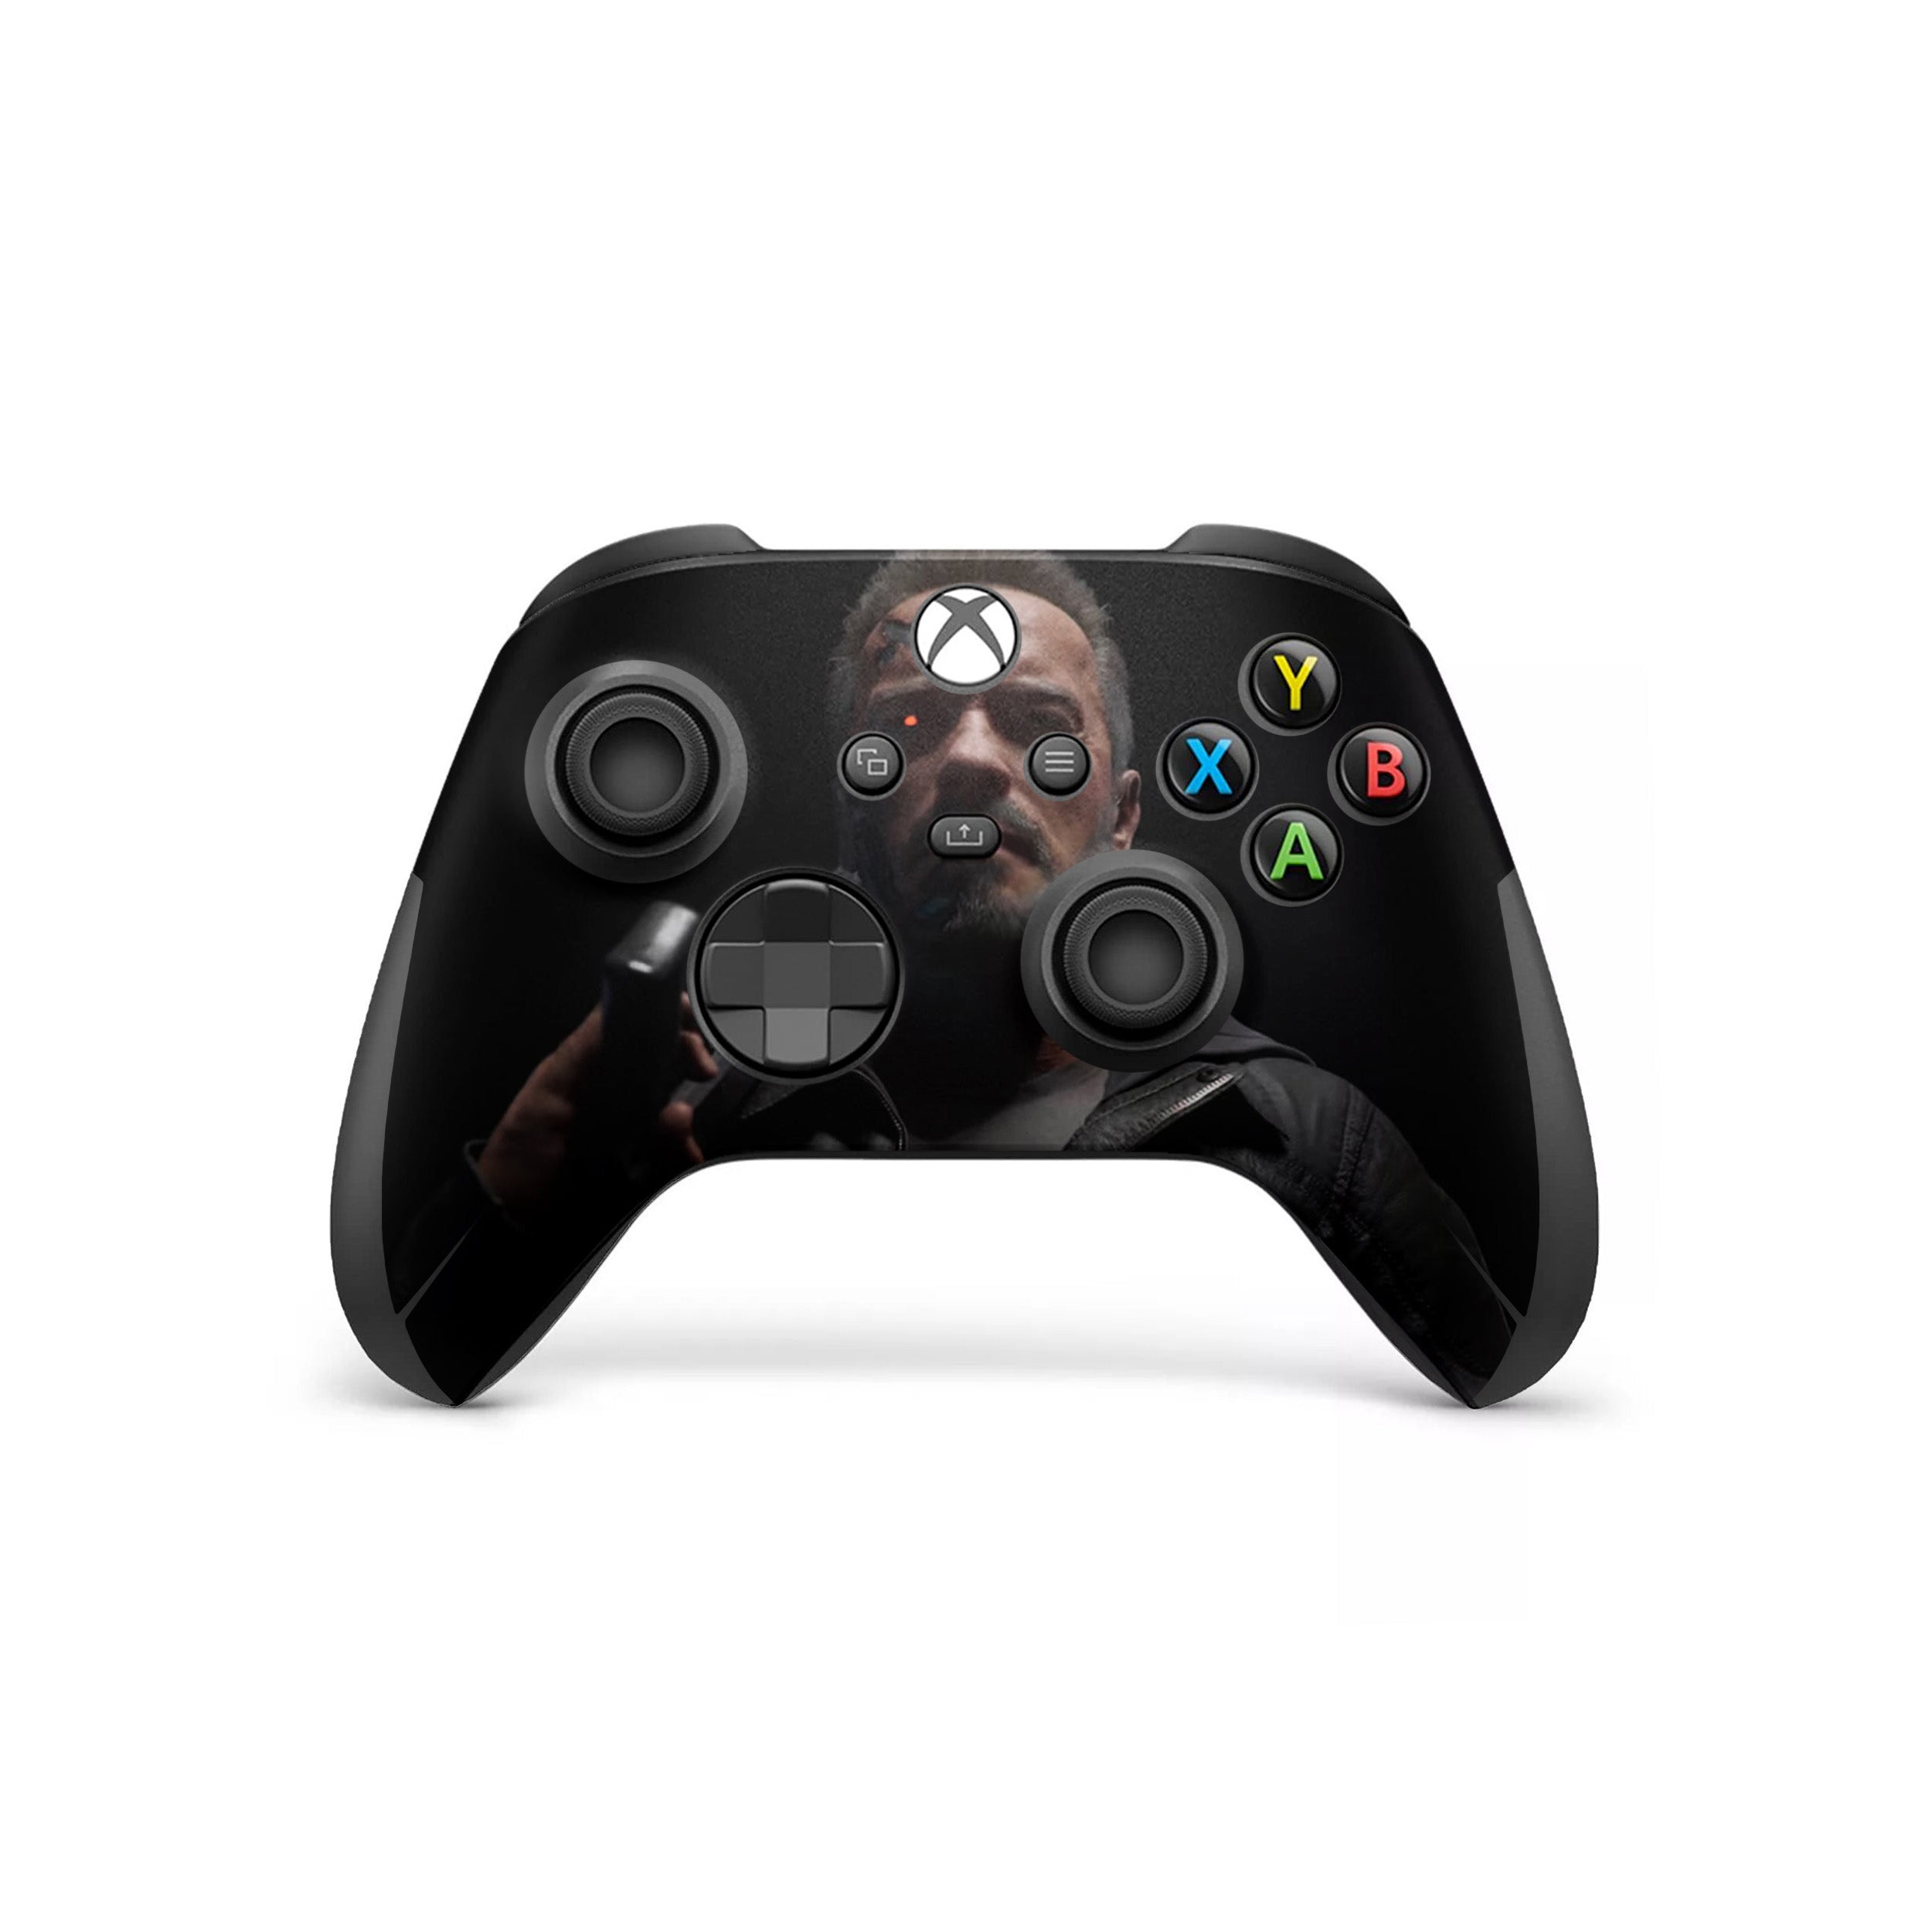 A video game skin featuring a Mortal Kombat 11 Shao Kahn design for the Xbox Wireless Controller.